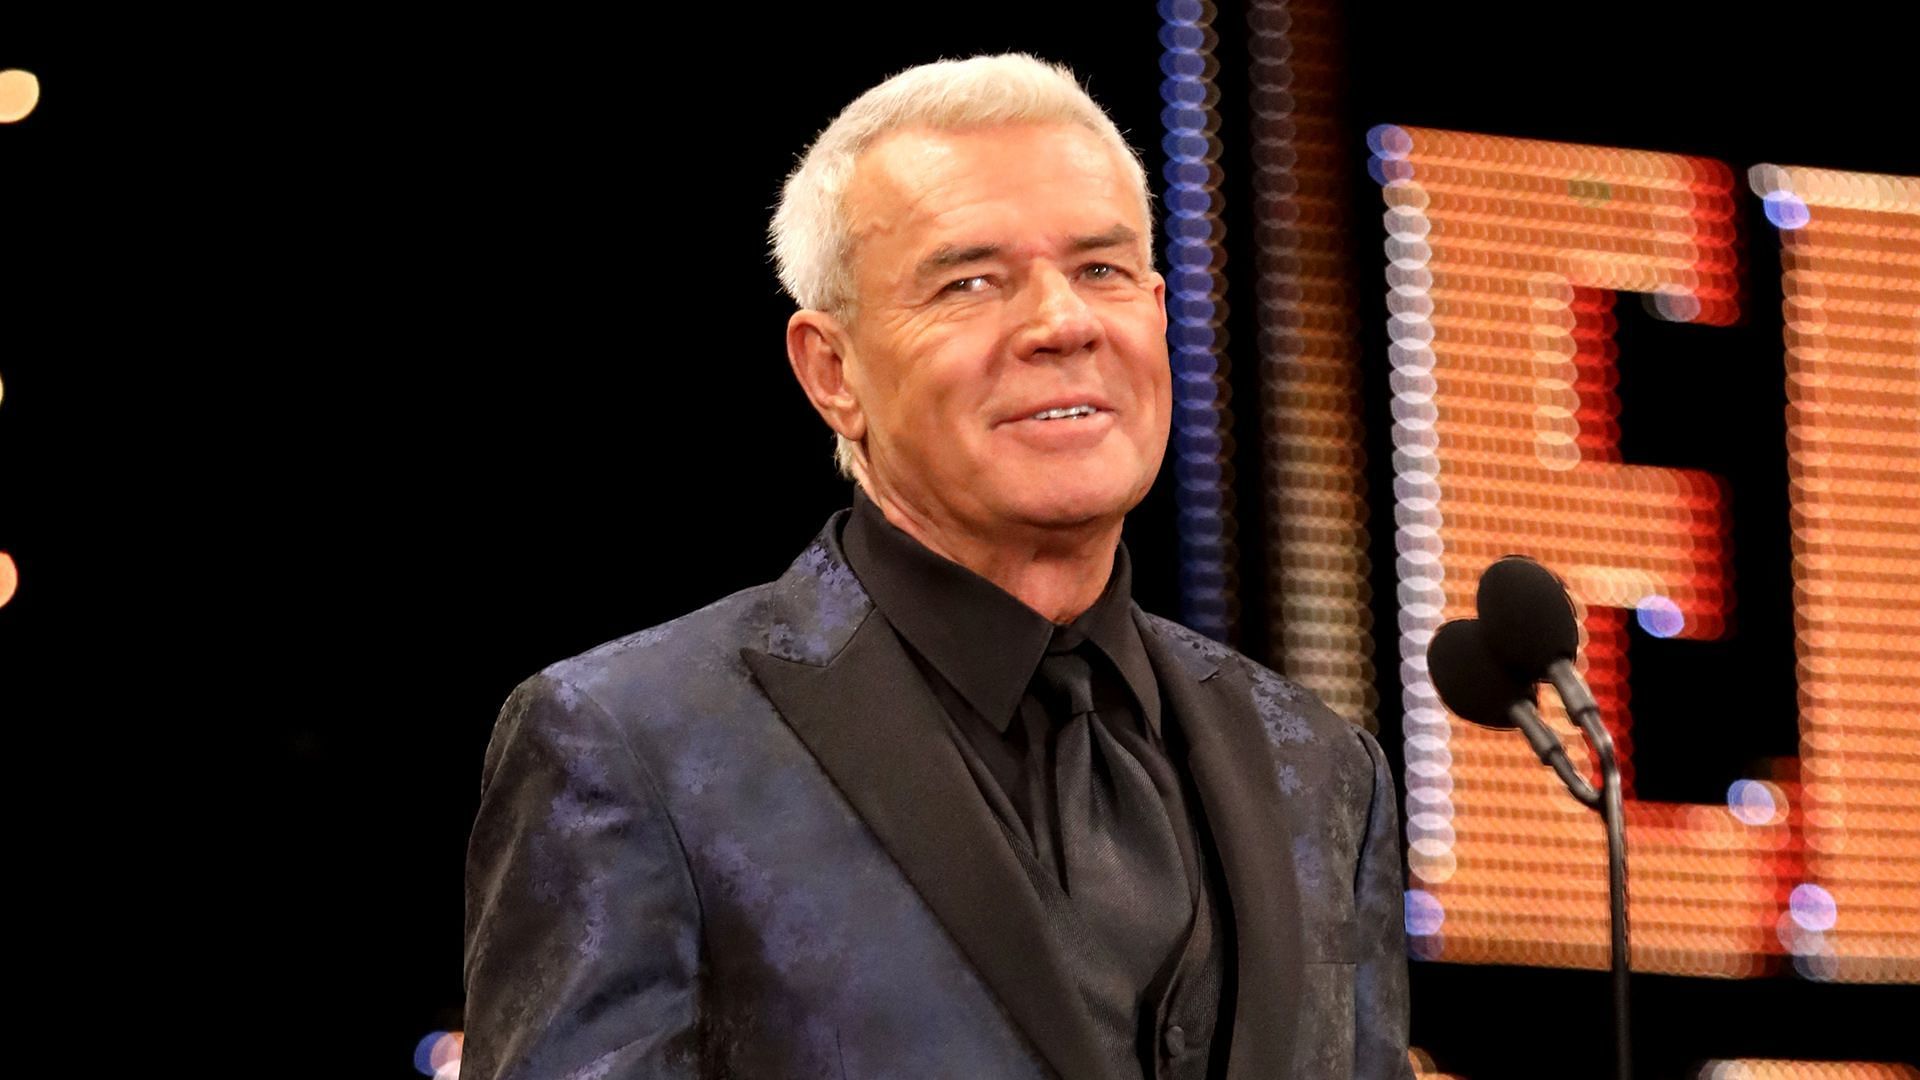 Eric Bischoff feels that WWE Hall of Famer Goldberg became tough to deal with after signing an agent